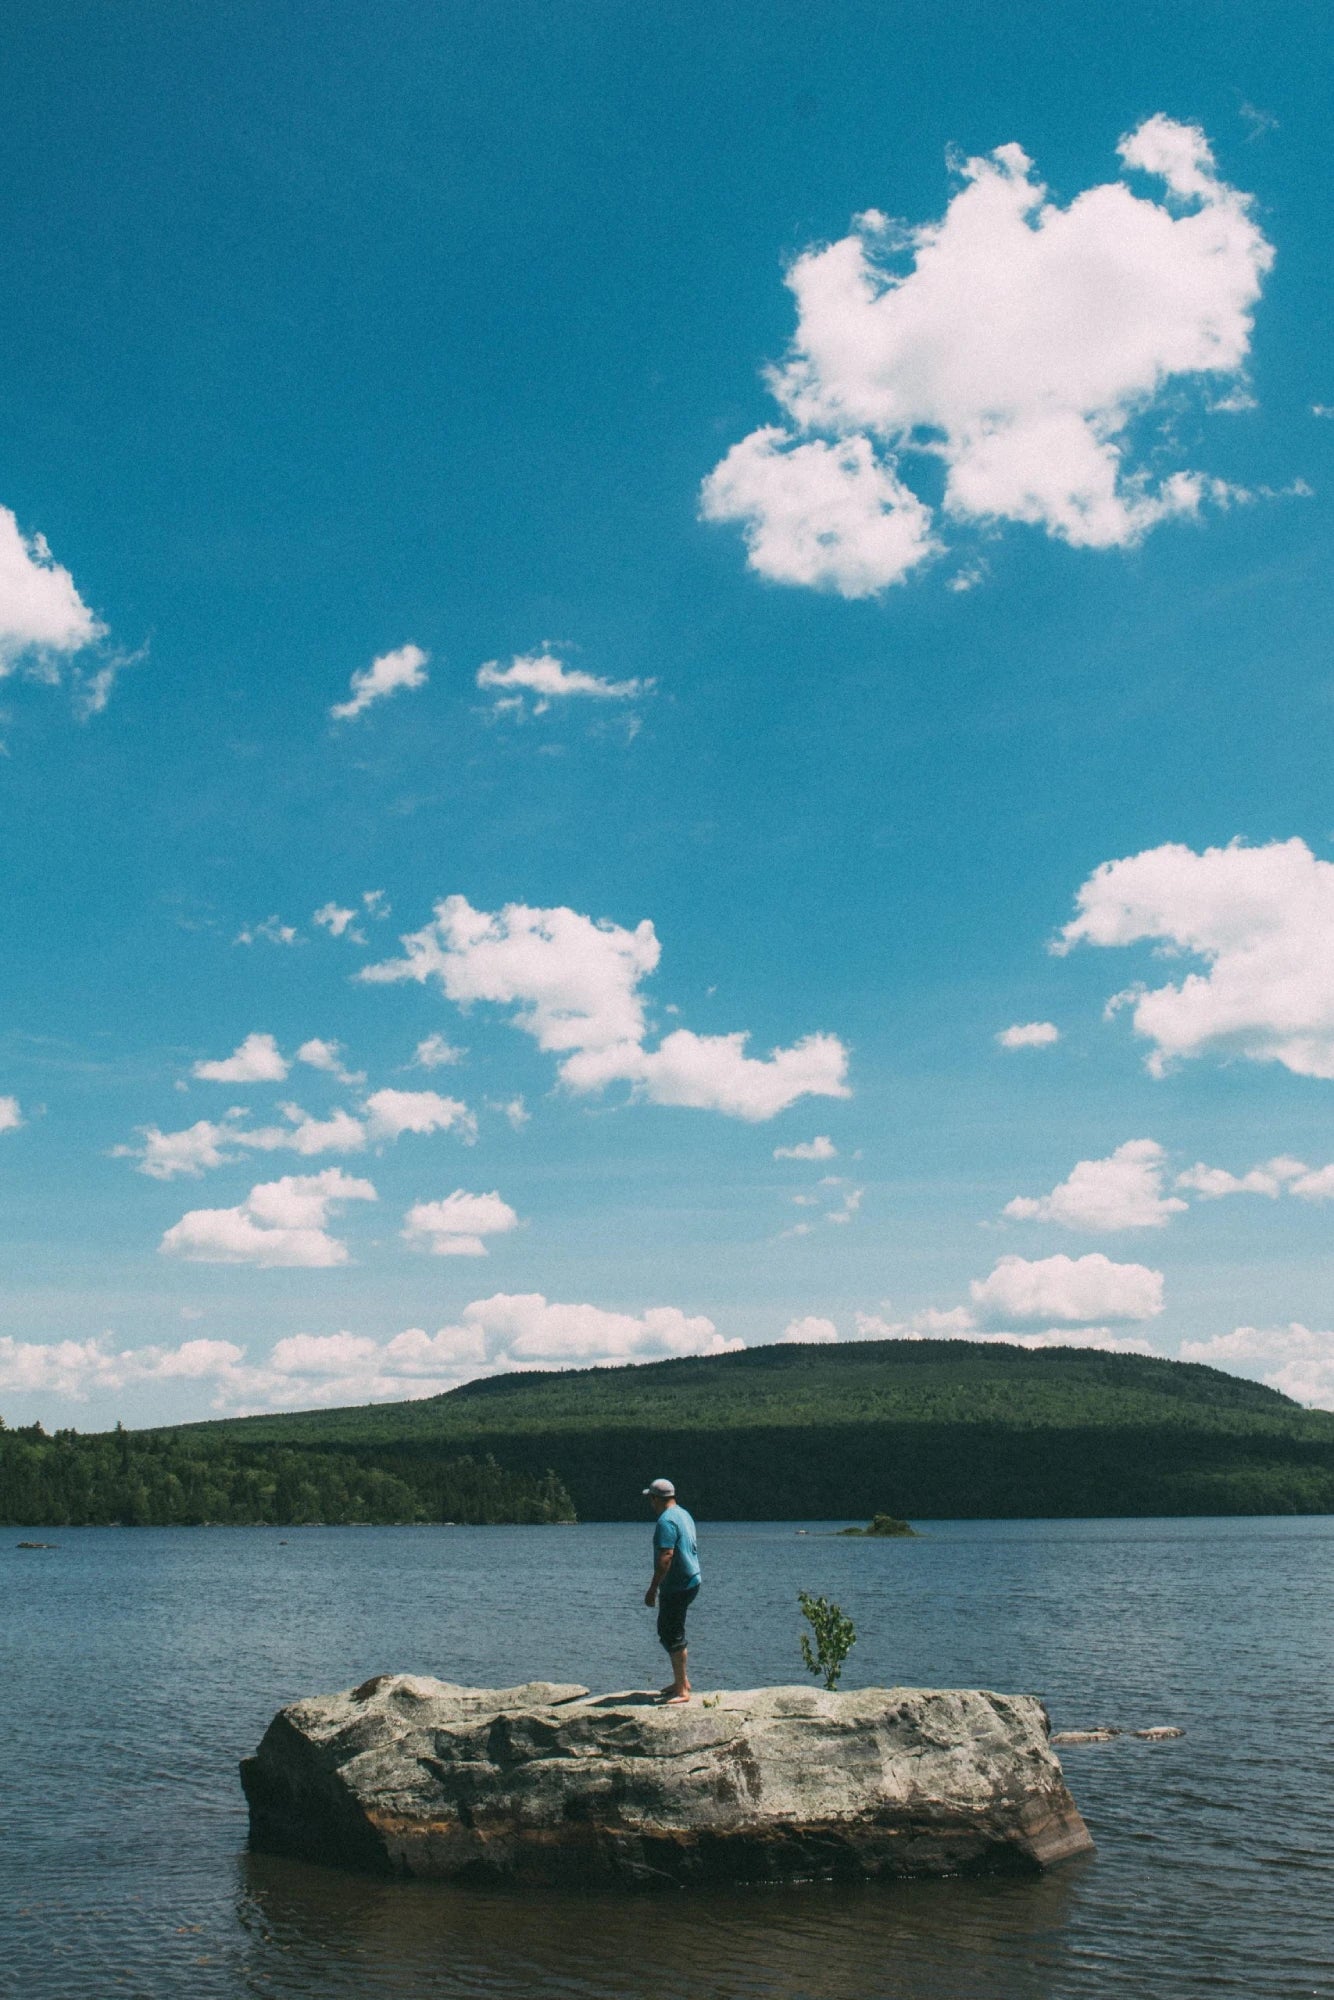 A lone man stands on a rock in the middle of a river on a sunny day.